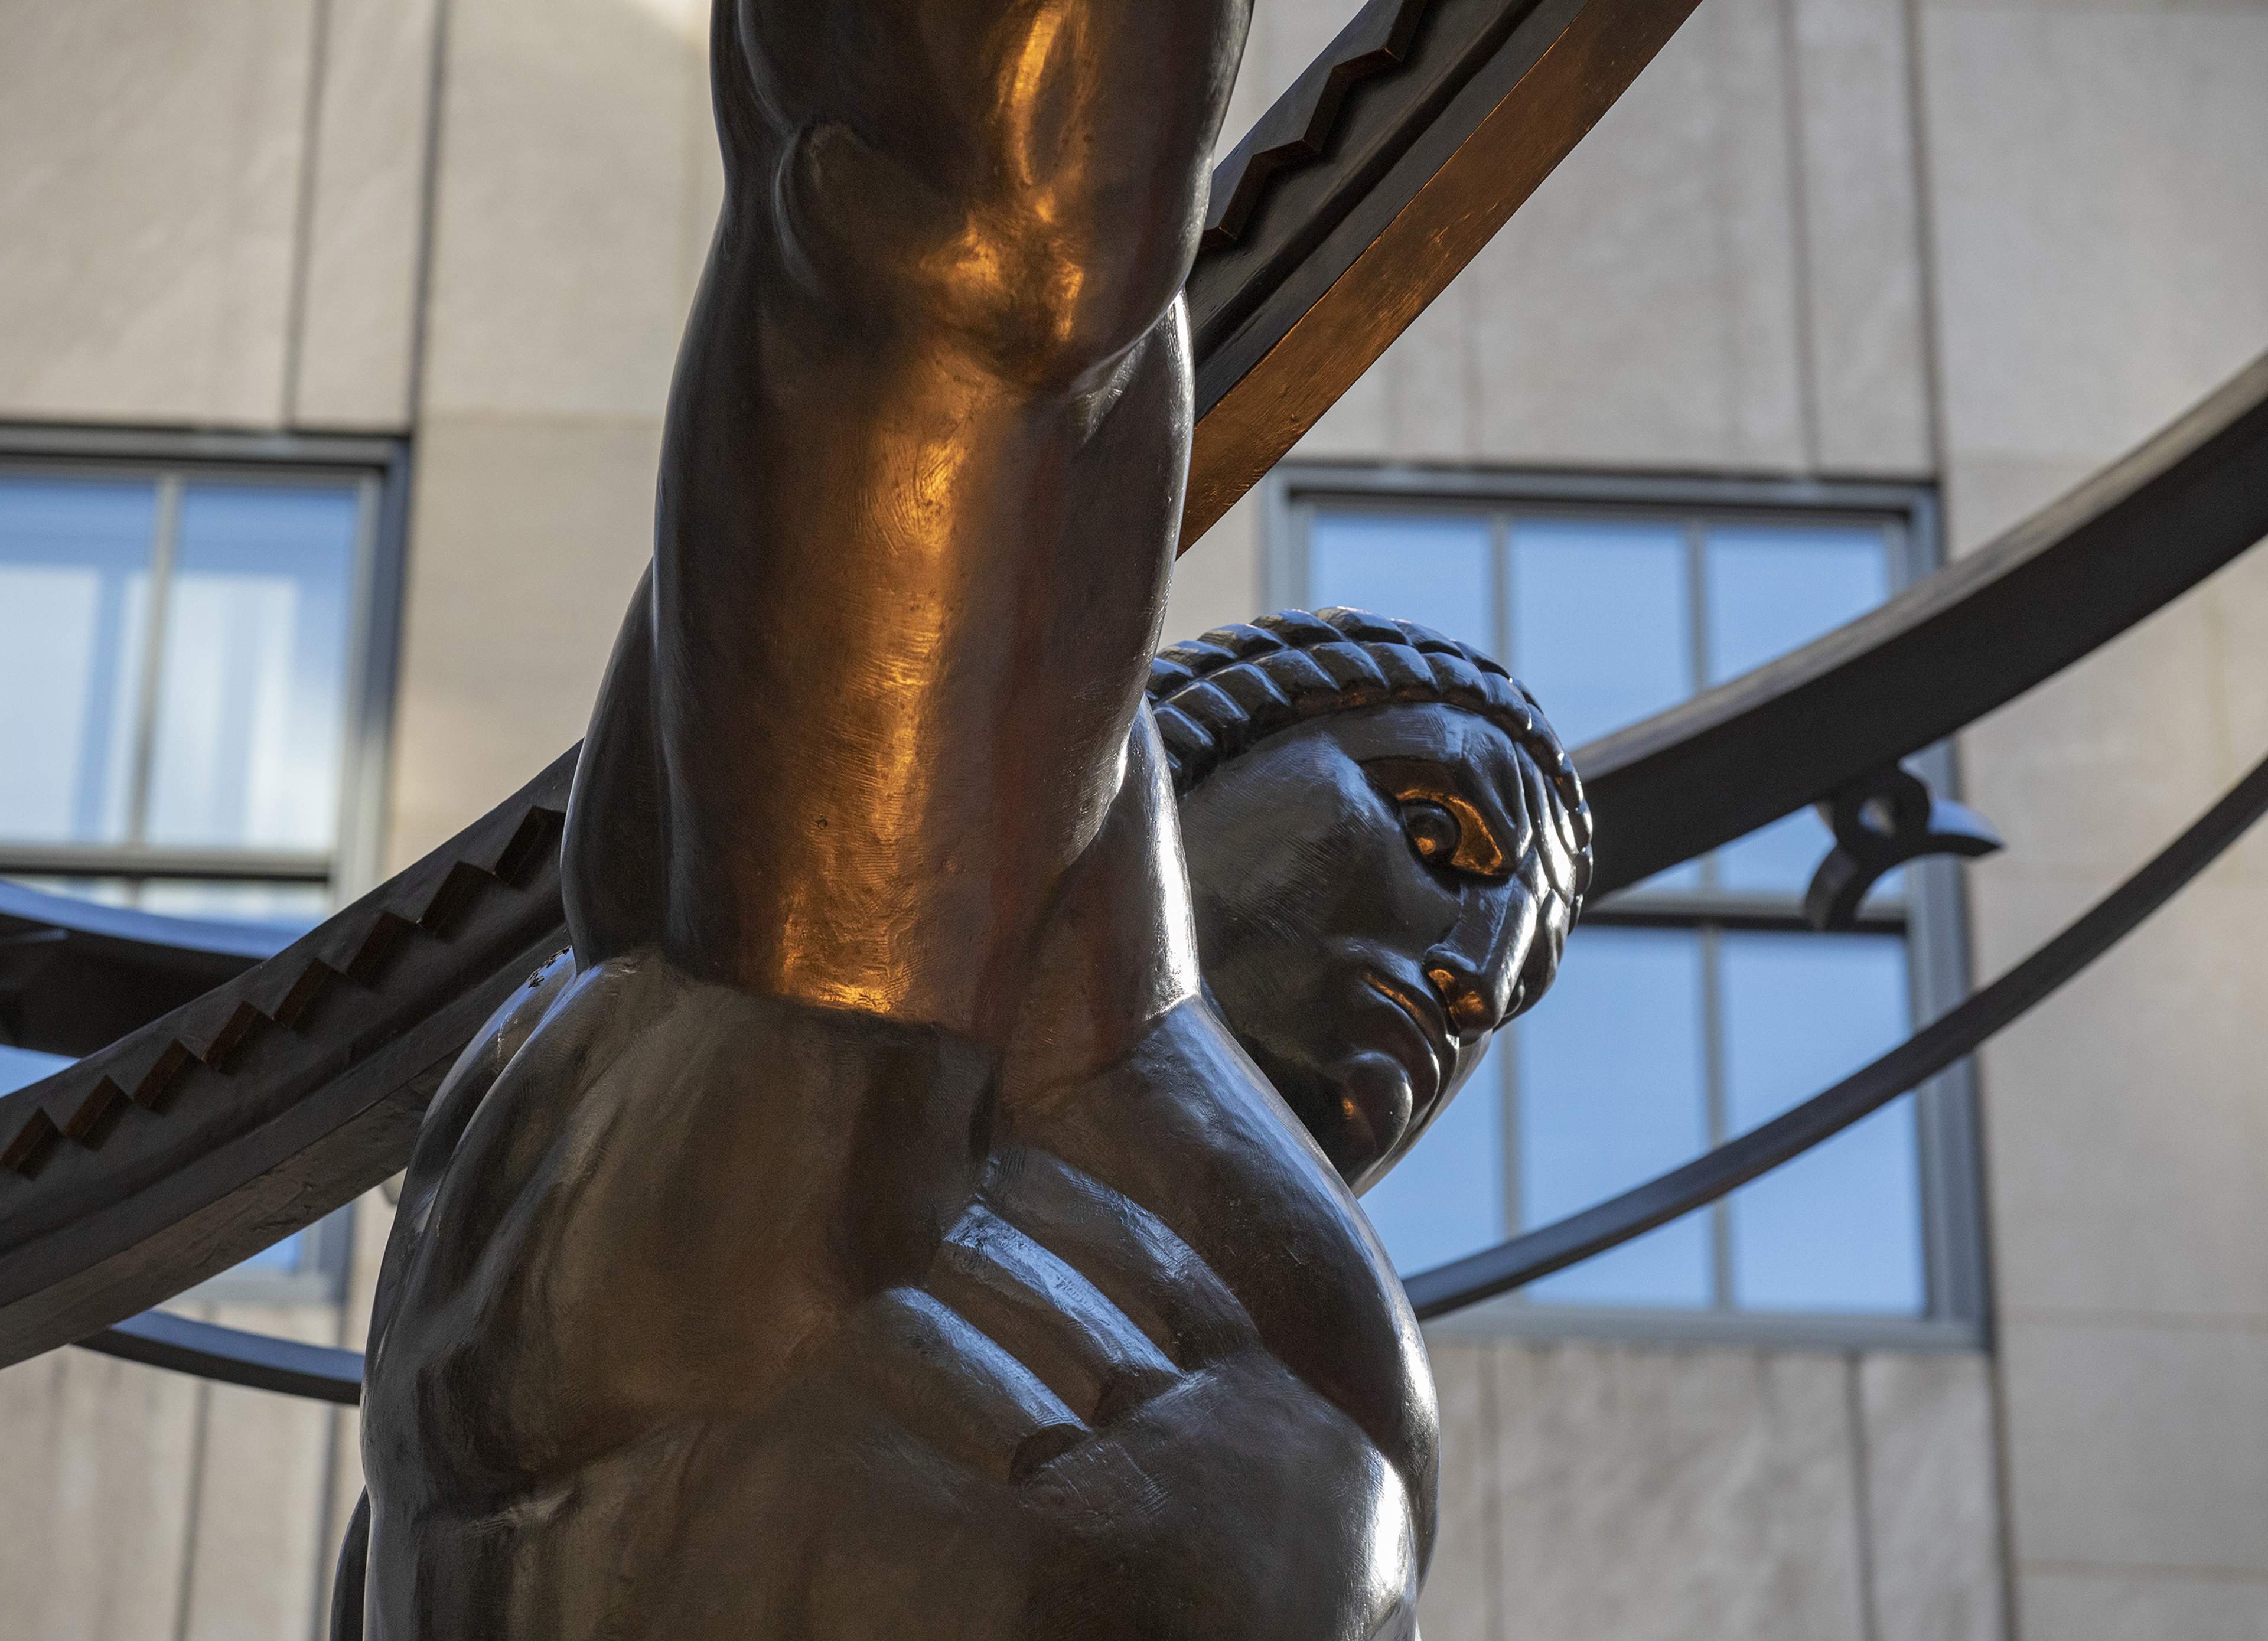 There is no place in our global portfolio quite like Rockefeller Center